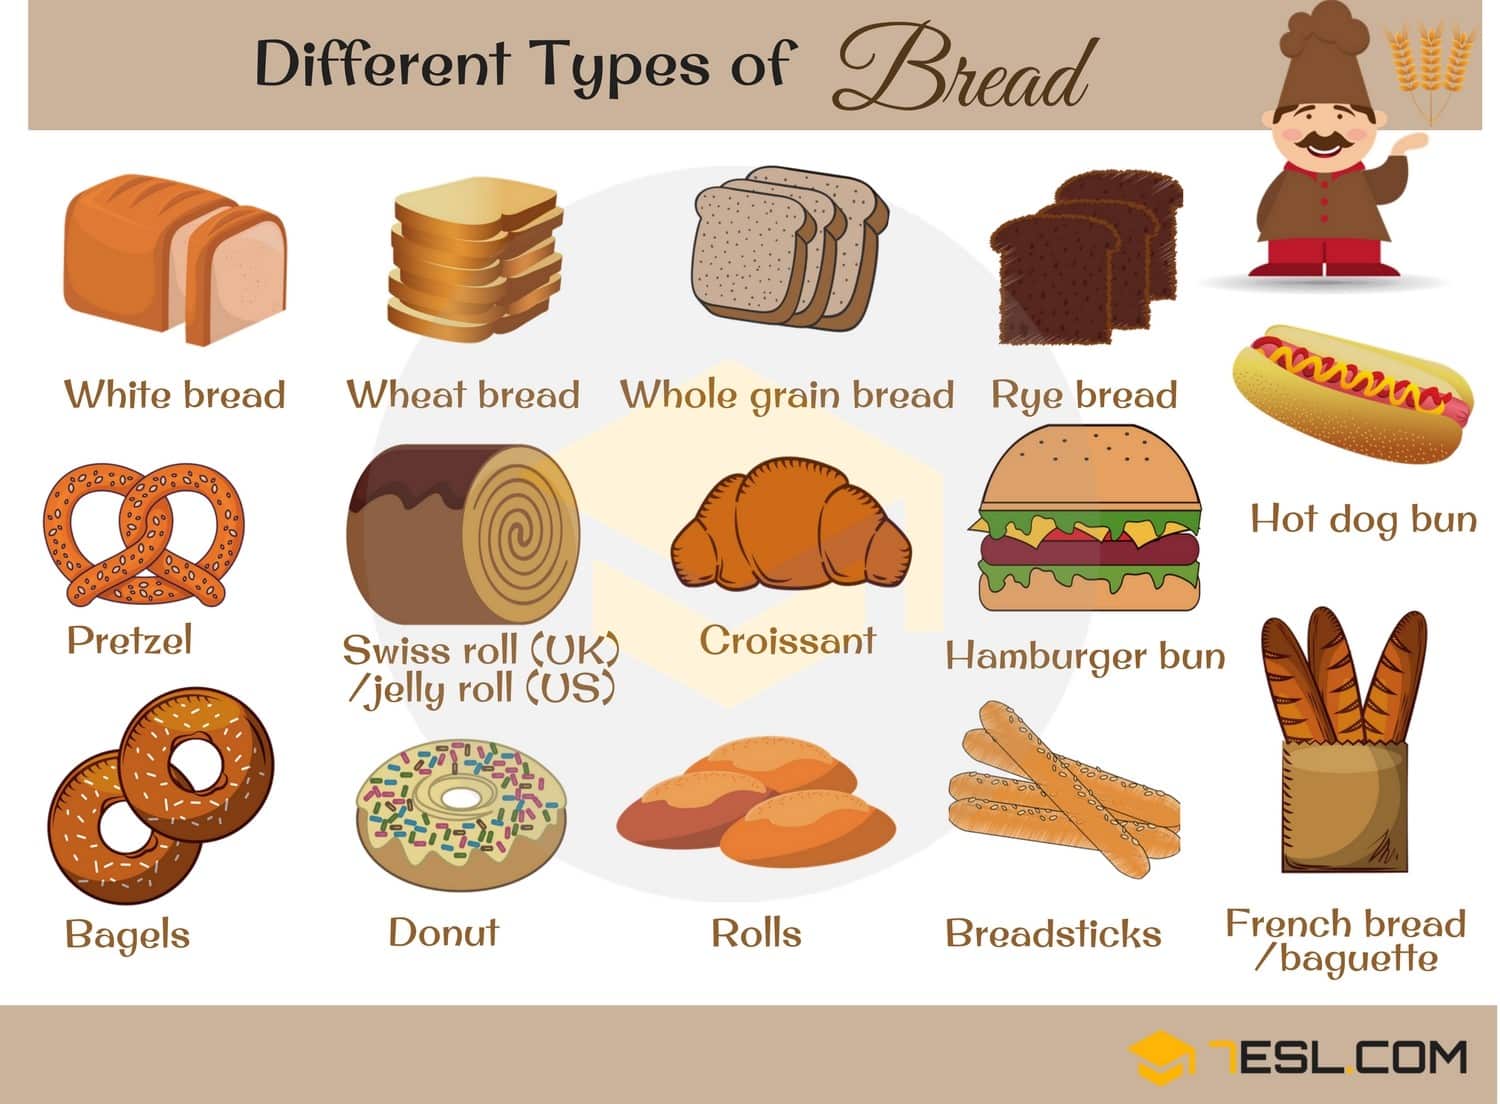 What are the 3 main types of bread? - Foodly